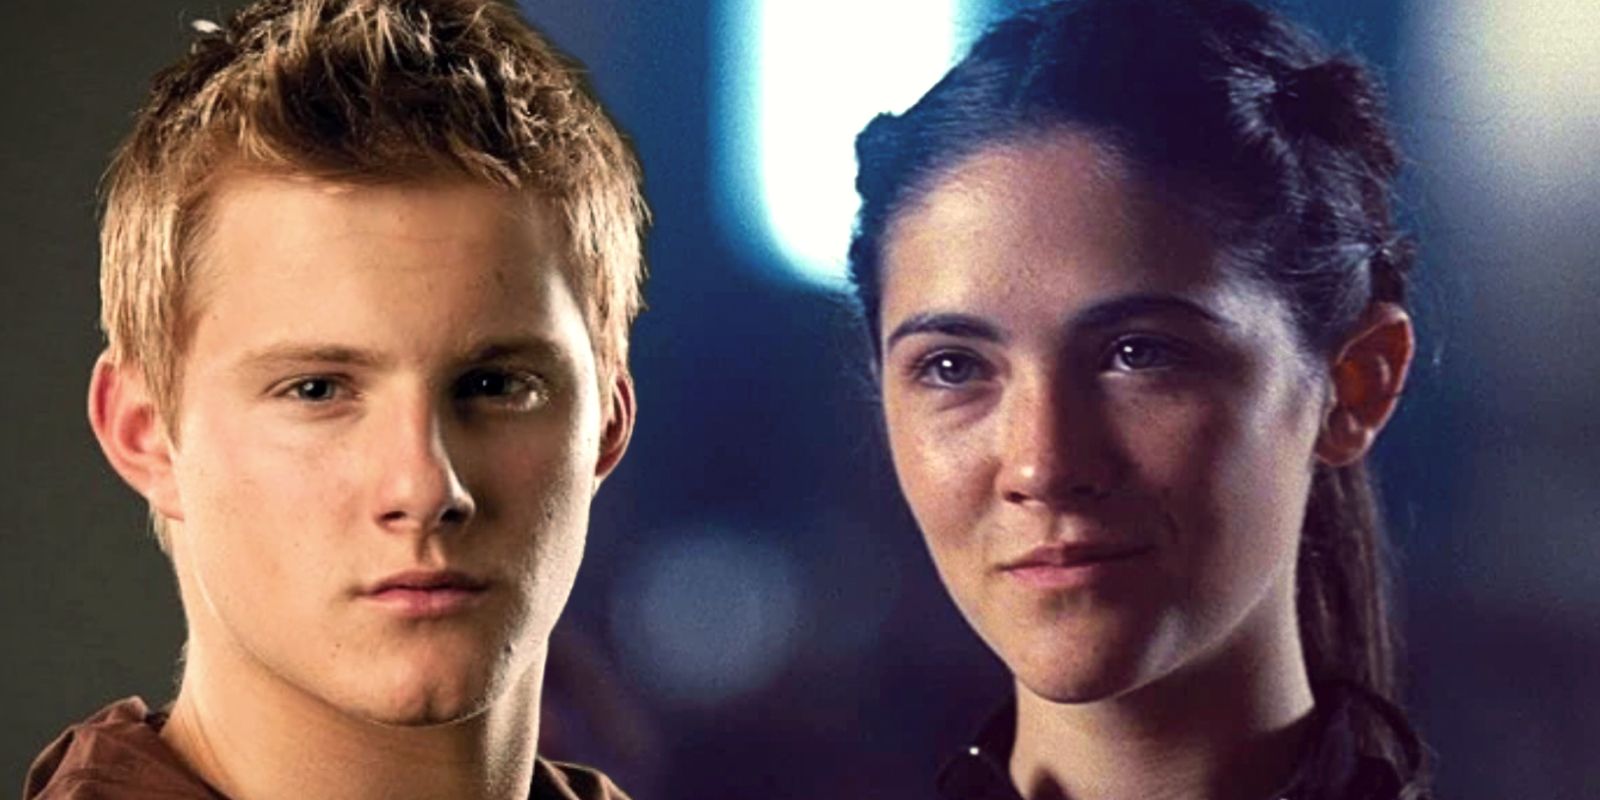 Alexander Ludwig as Cato and Isabelle Fuhrman as Clove in The Hunger Games